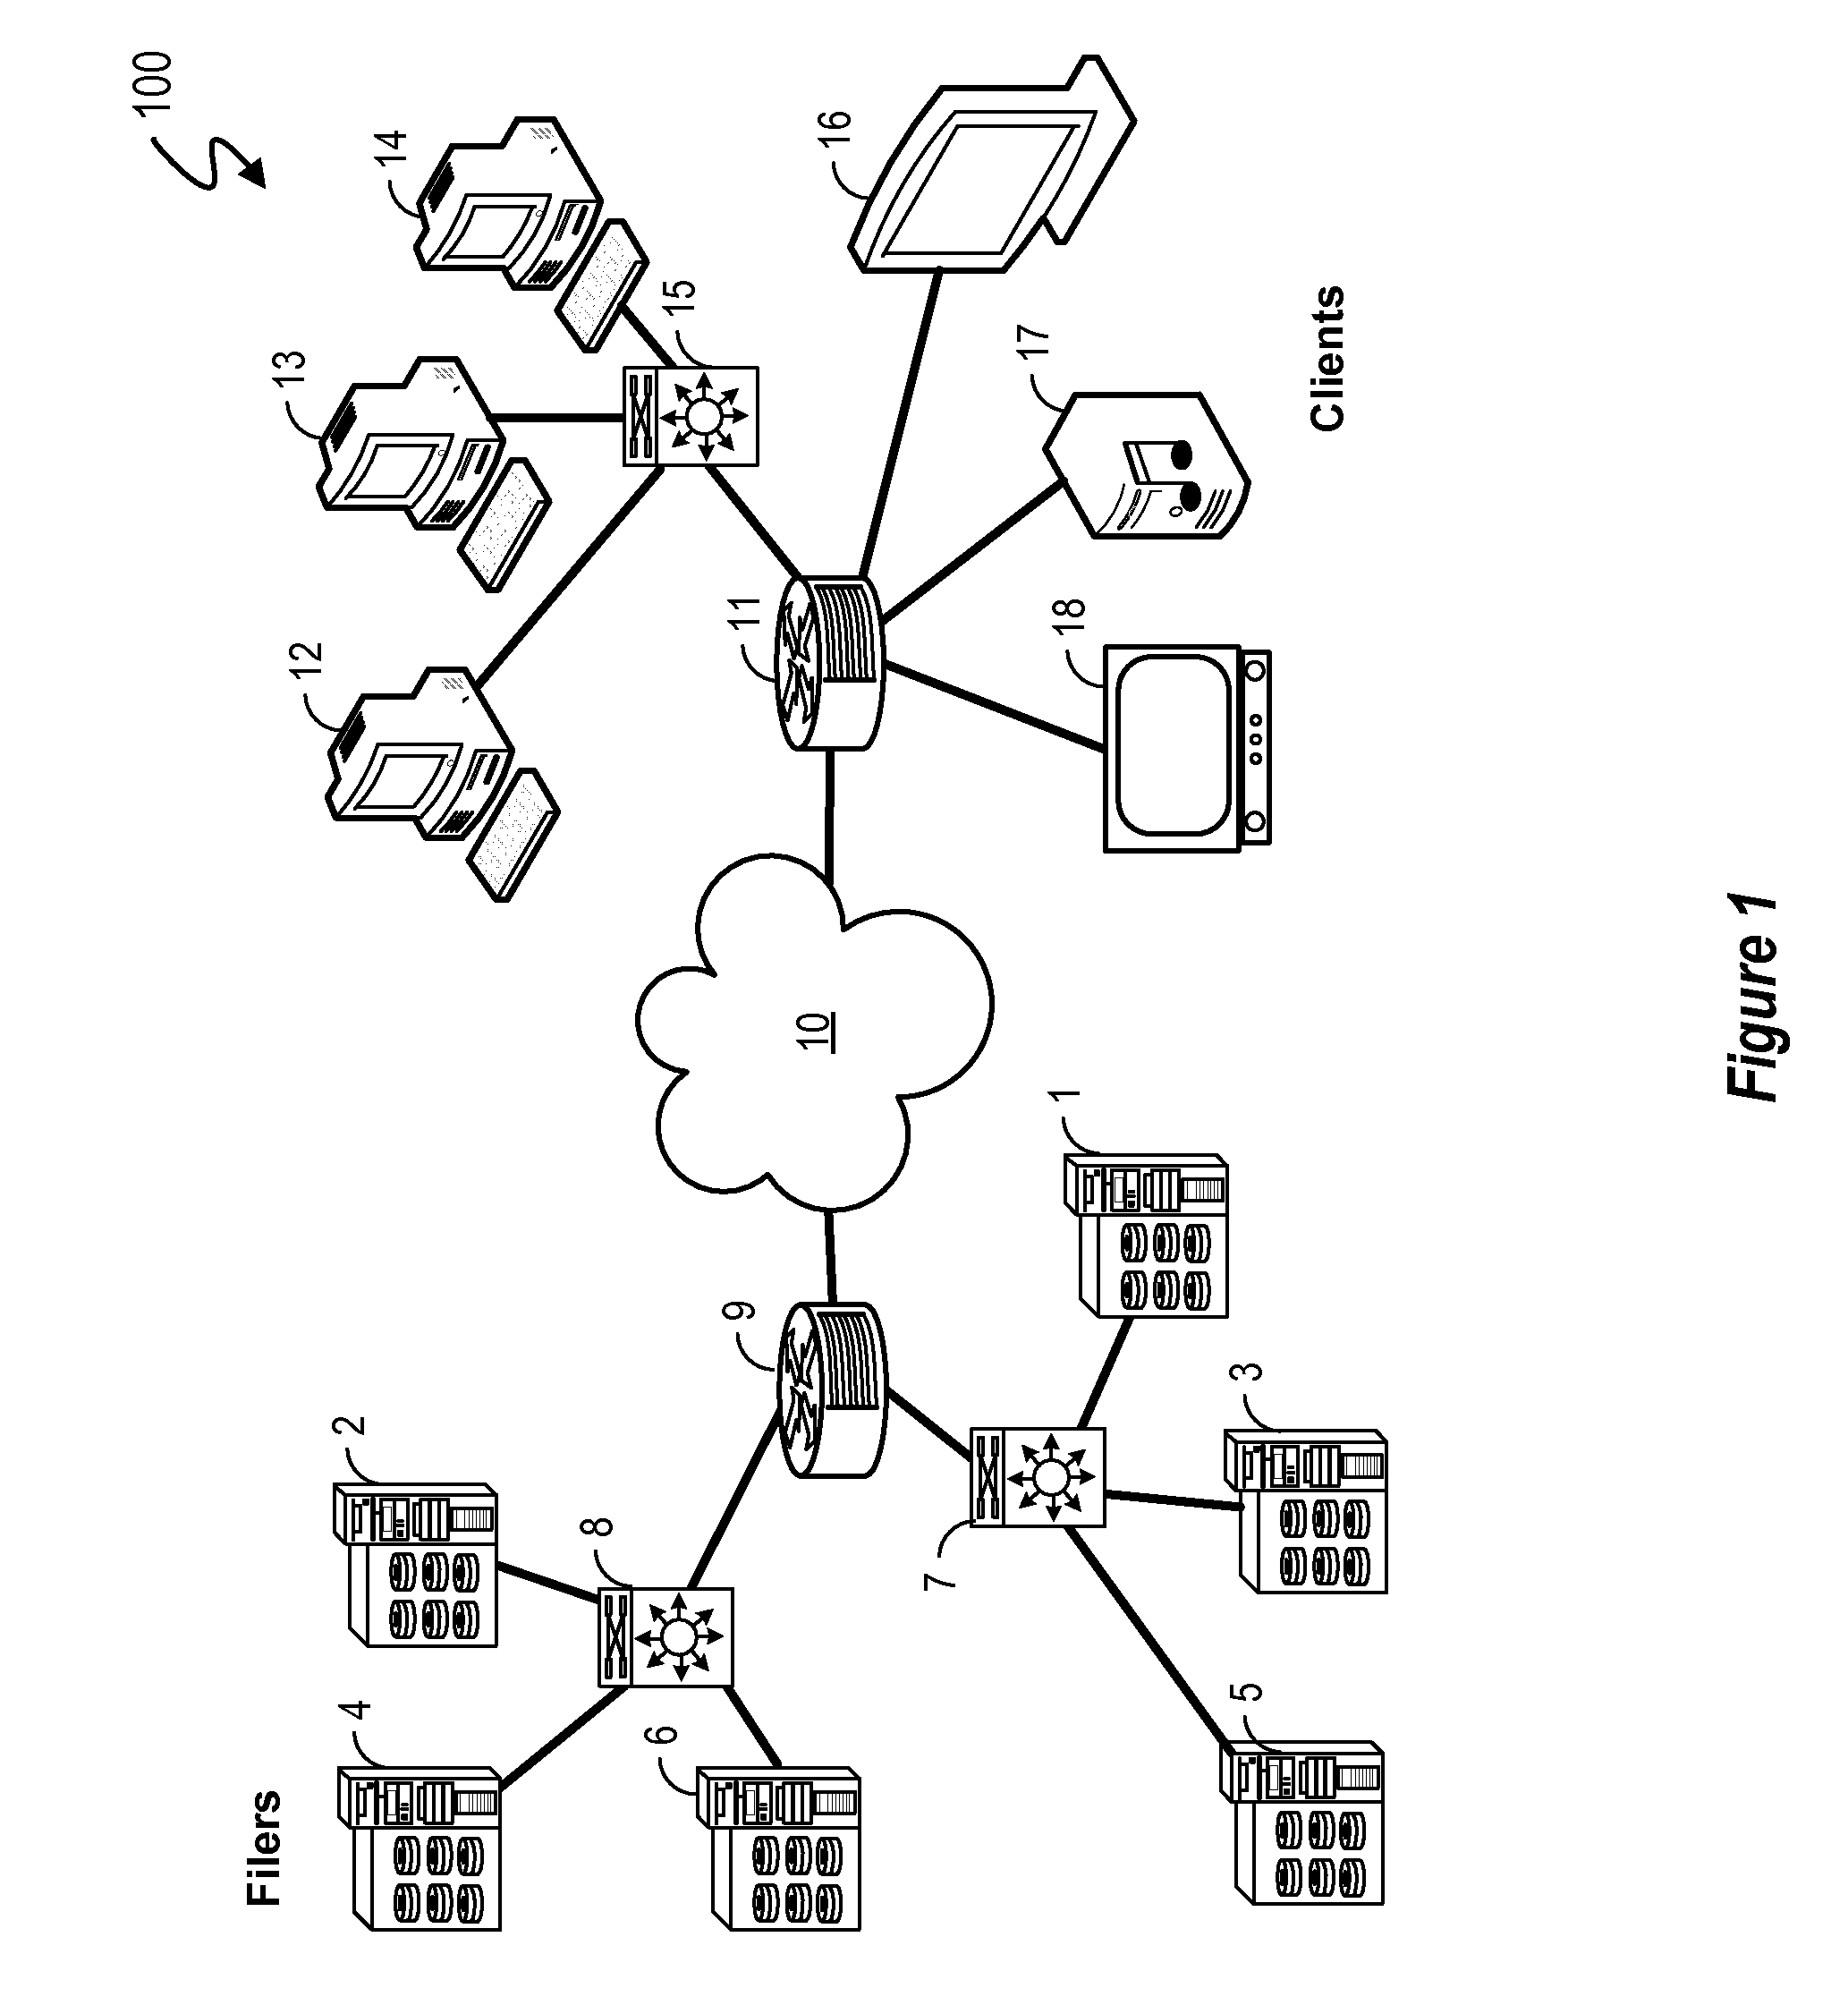 Flash DIMM in a Standalone Cache Appliance System and Methodology